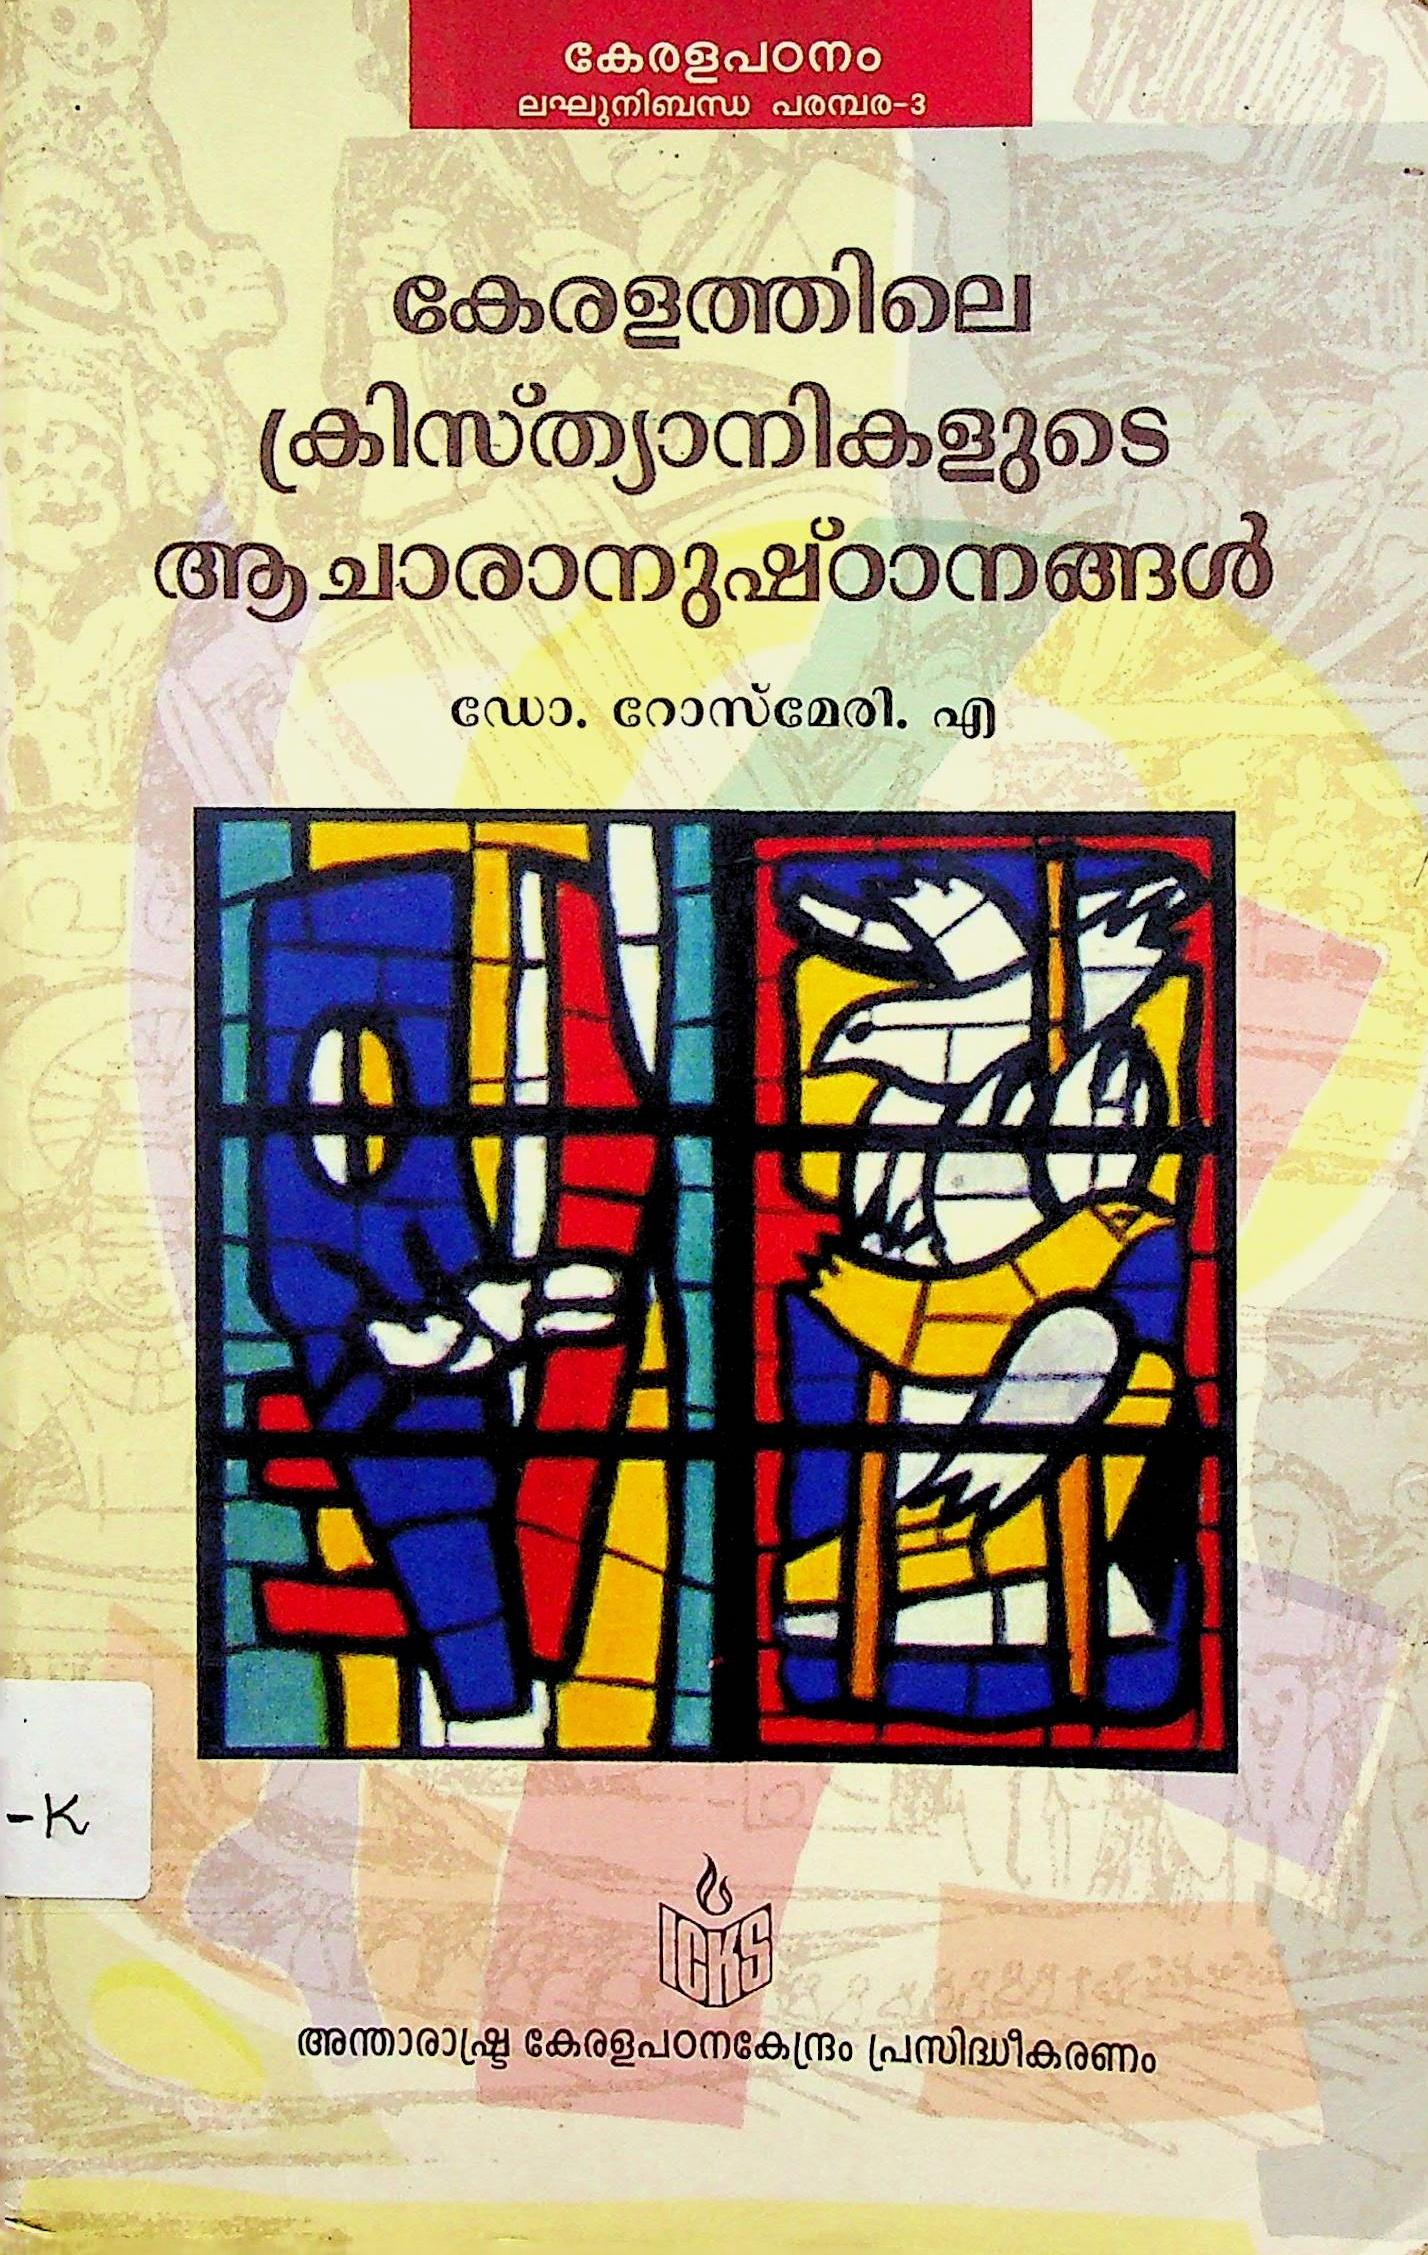 Traditions of Christians in Kerala